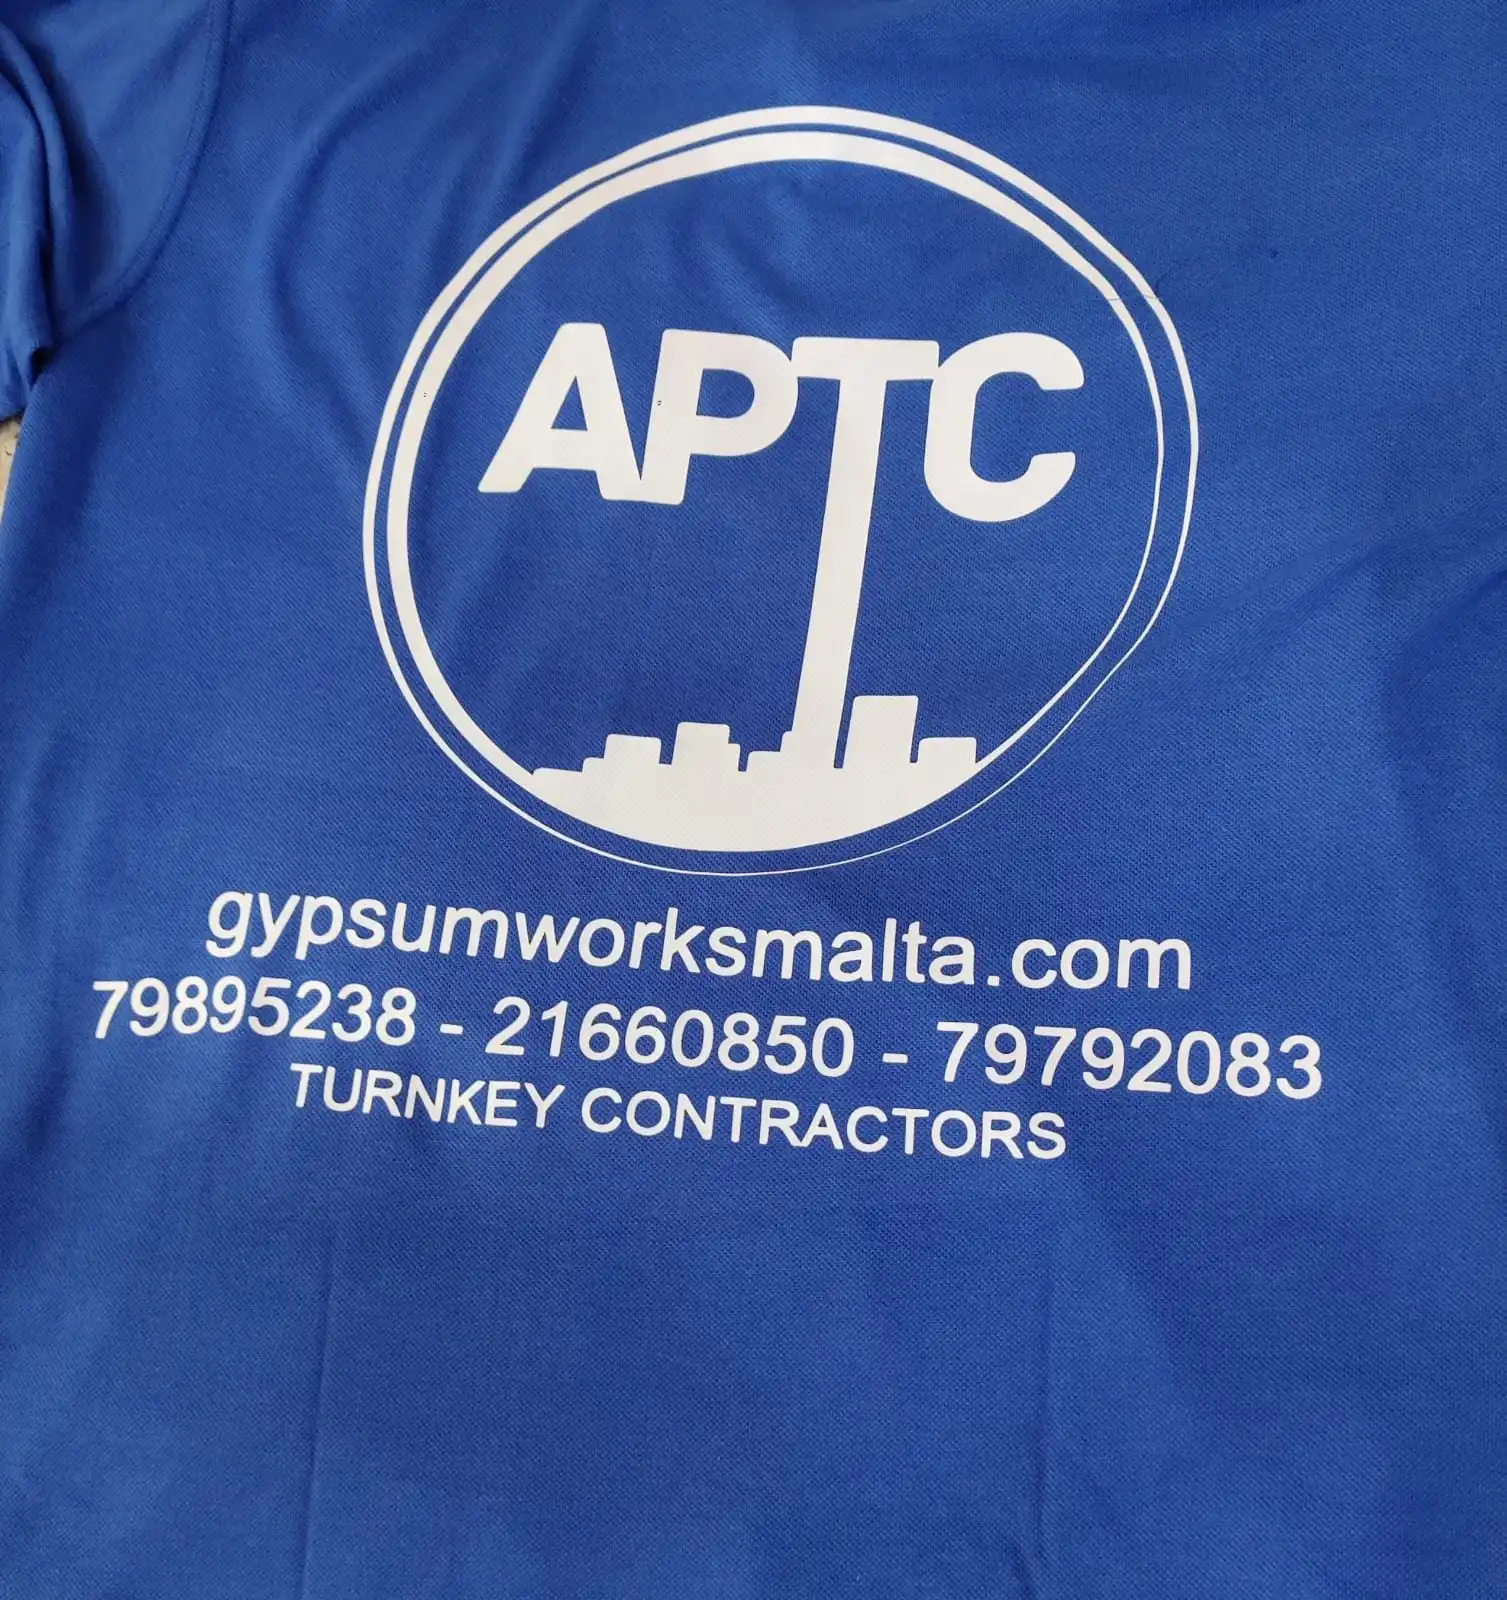 Vinyl tshirt cut and pressed by kodly for APTC gypsum and turnkey contractors malta